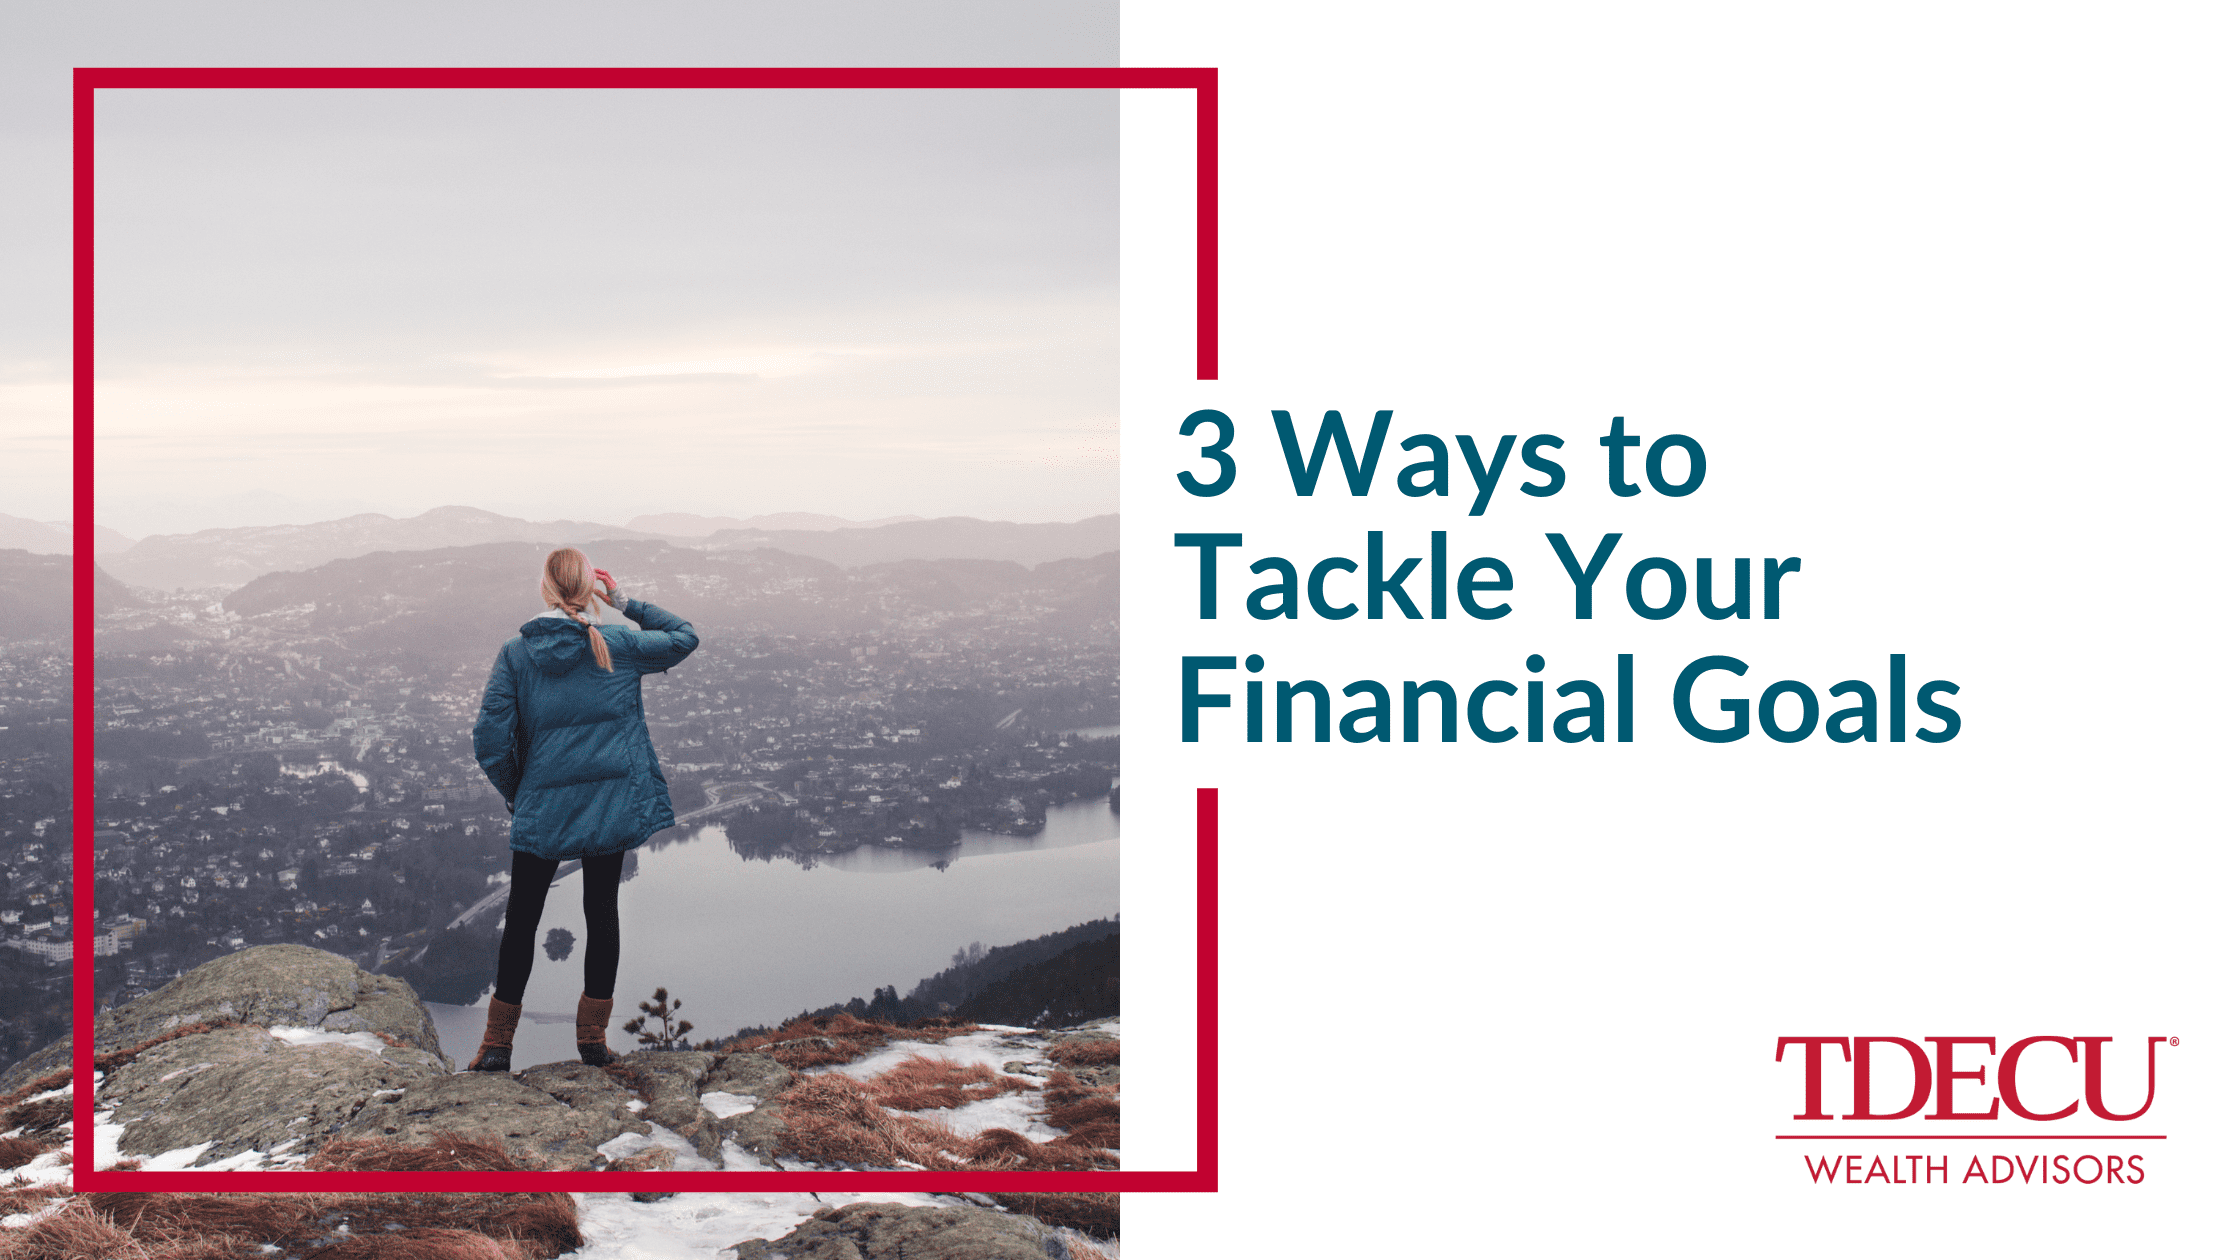 3 Ways to Tackle Your Financial Goals